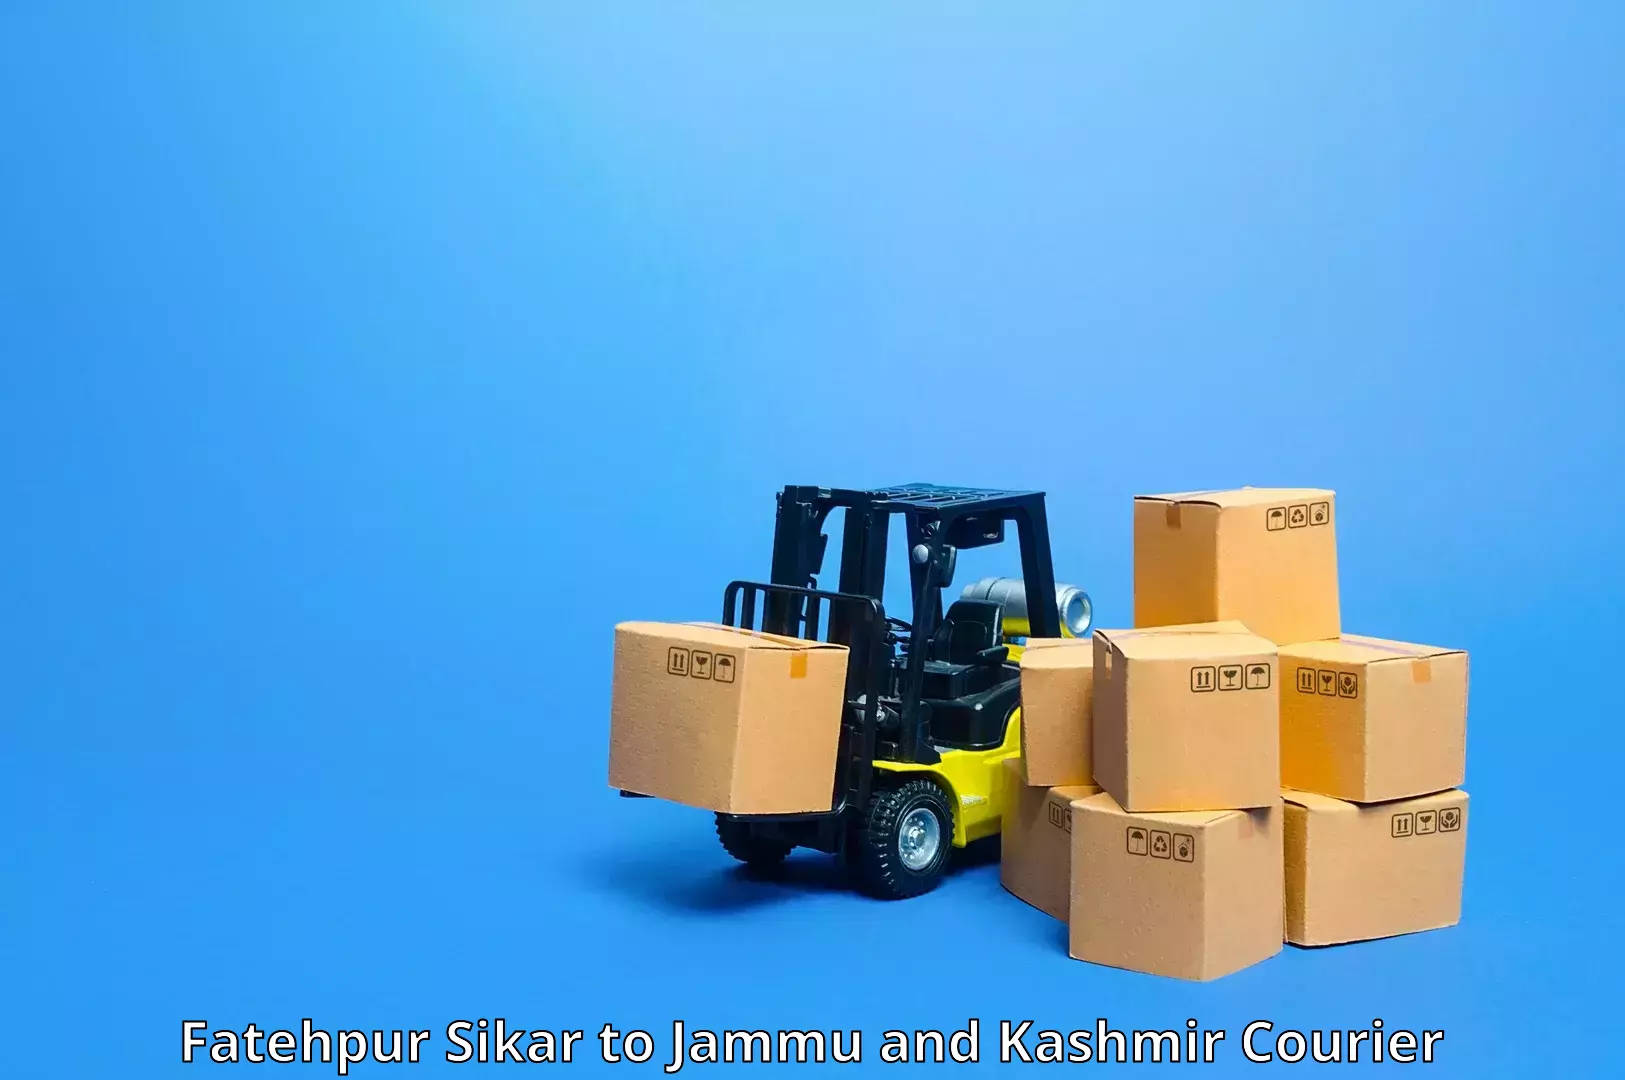 Tailored shipping plans Fatehpur Sikar to Jammu and Kashmir